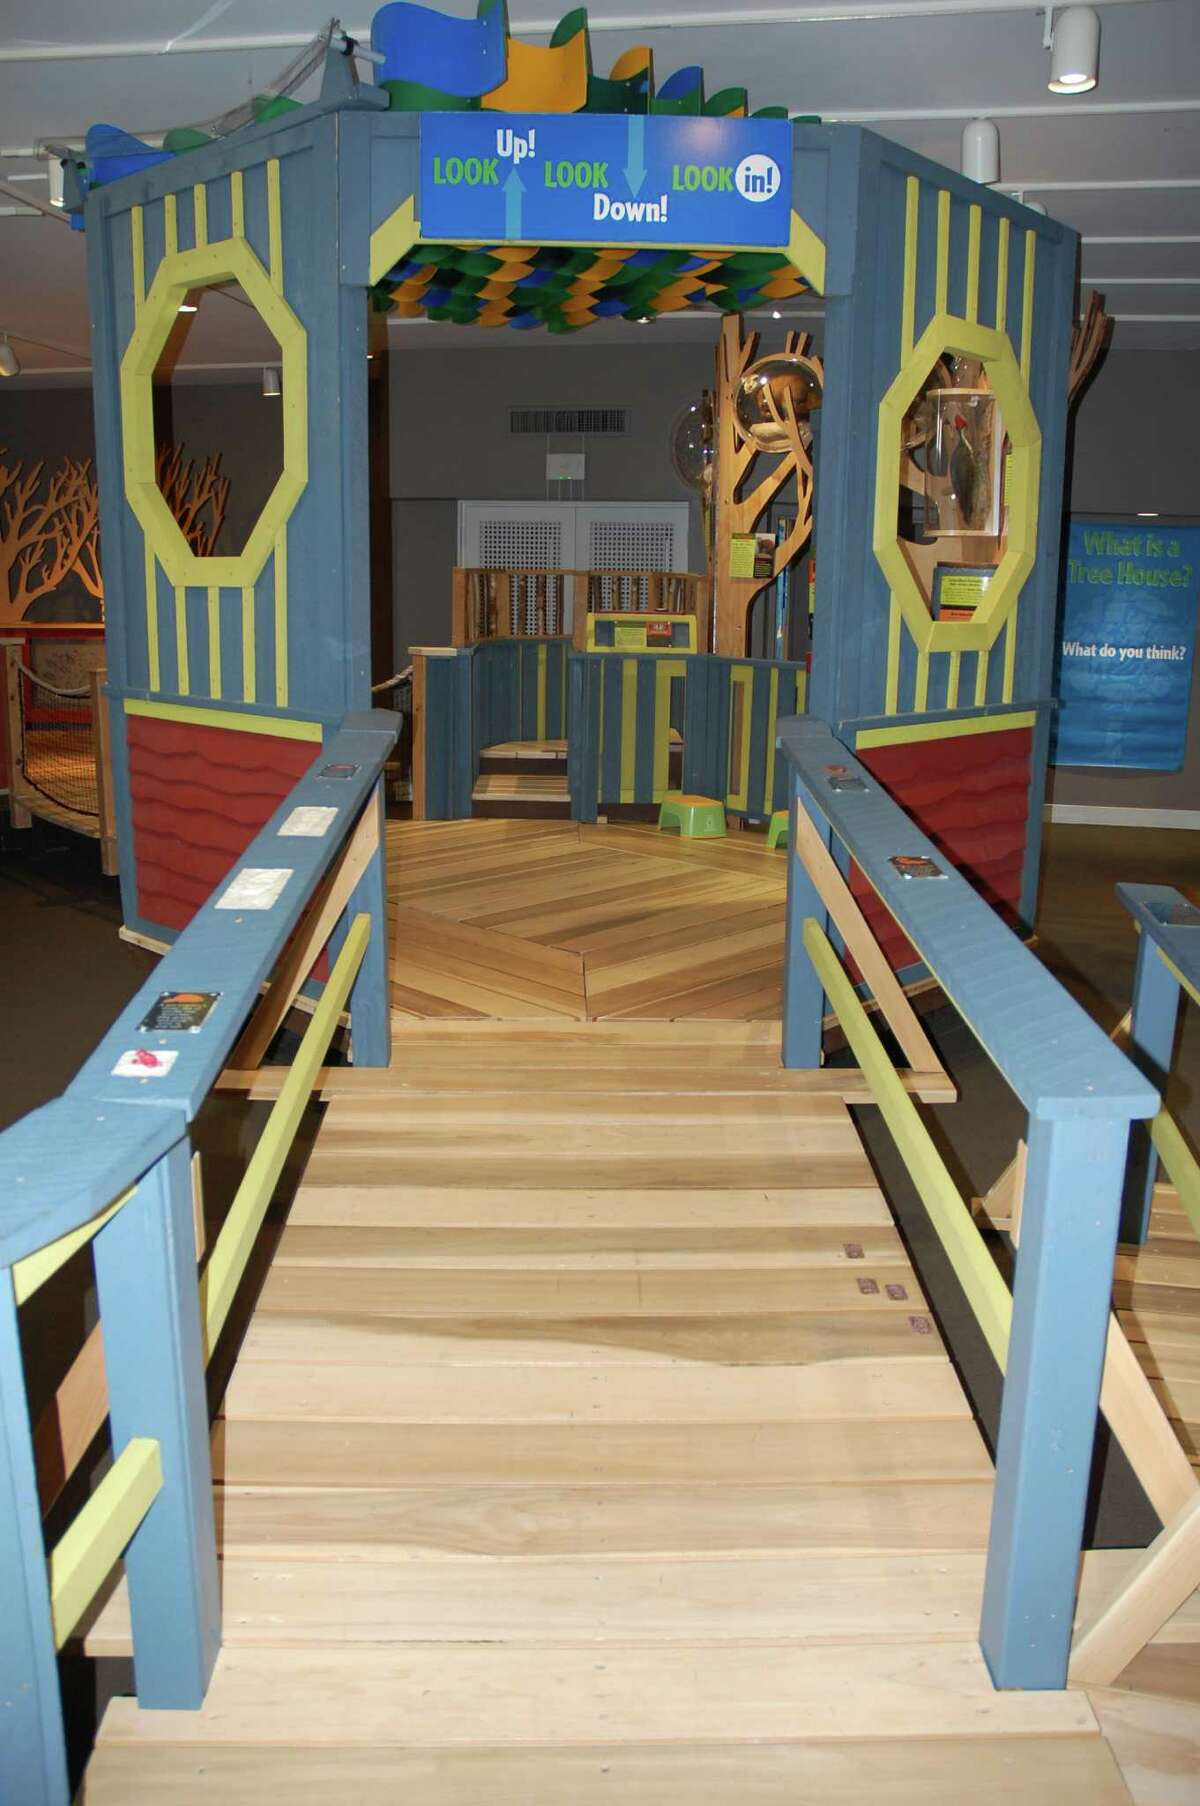 "Treehouses: Look Who's Living in the Trees!" is on view at the Stamford Museum & Nature Center through Sept. 1.